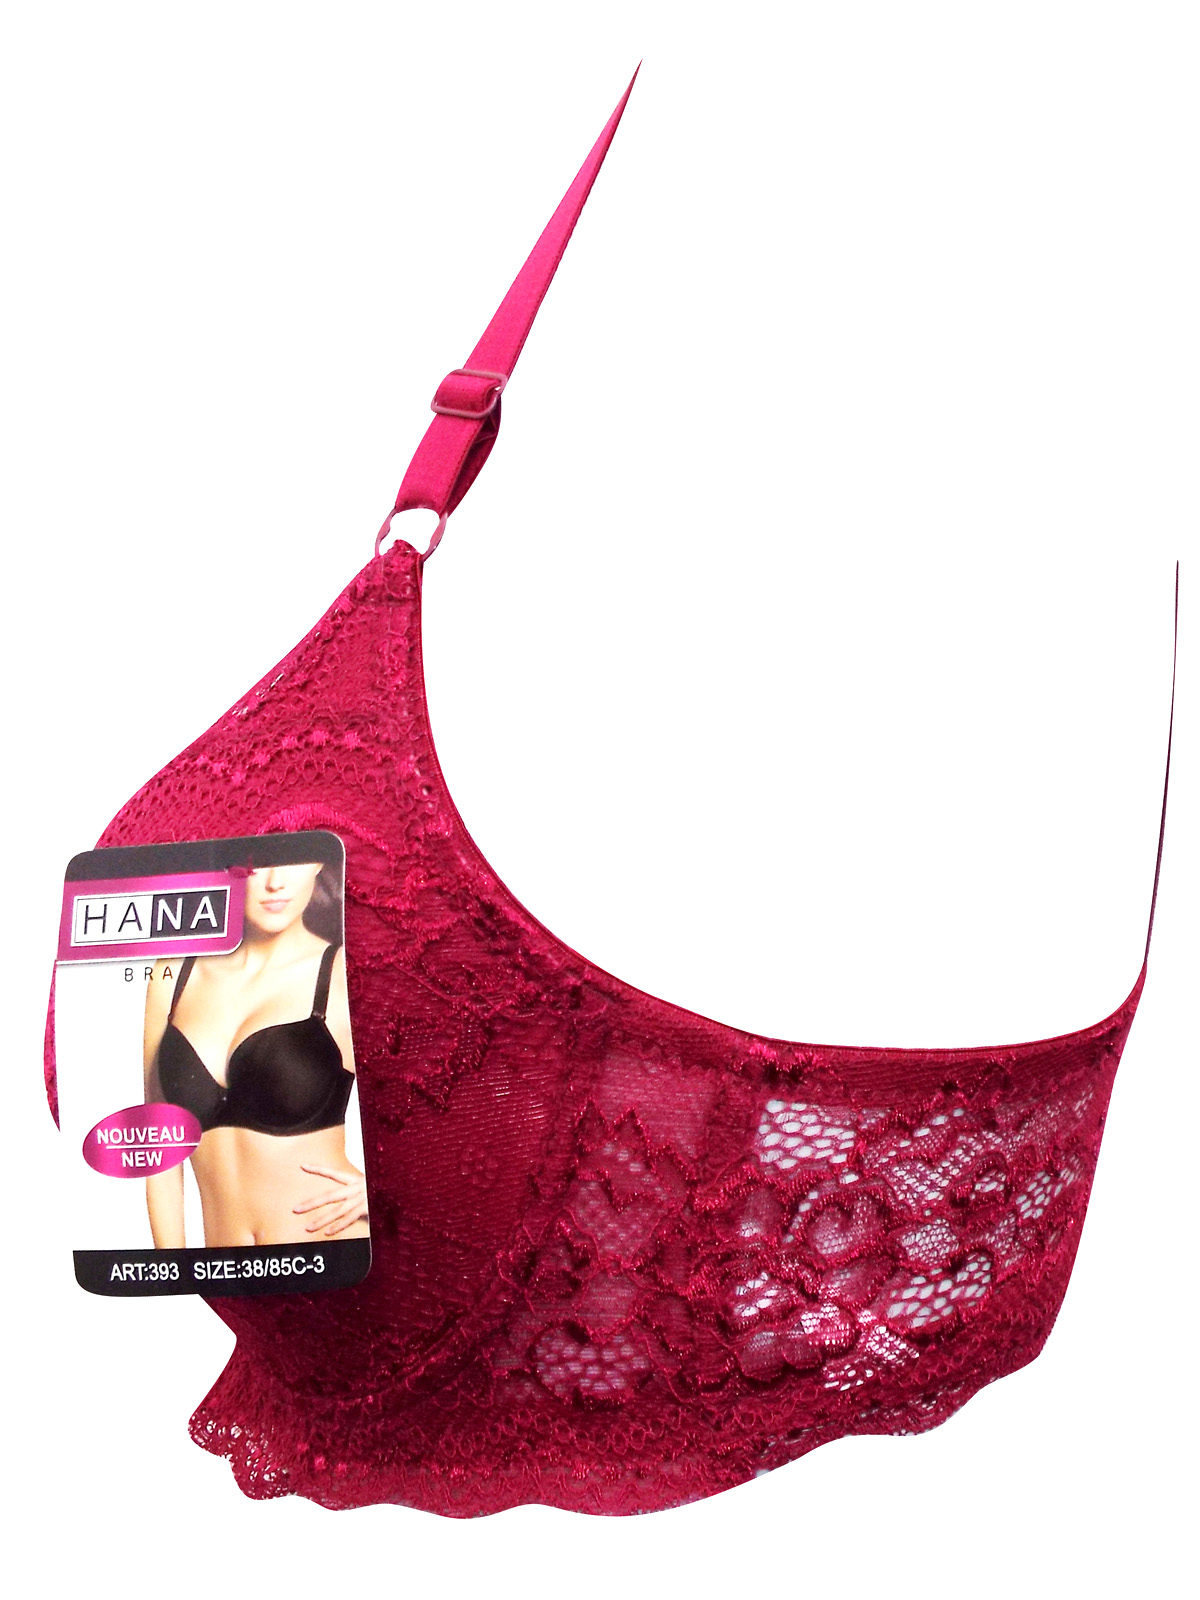 Hana Hana Cherry Floral Lace Padded And Wired Full Cup Bra Size 38 To 48 C Cup